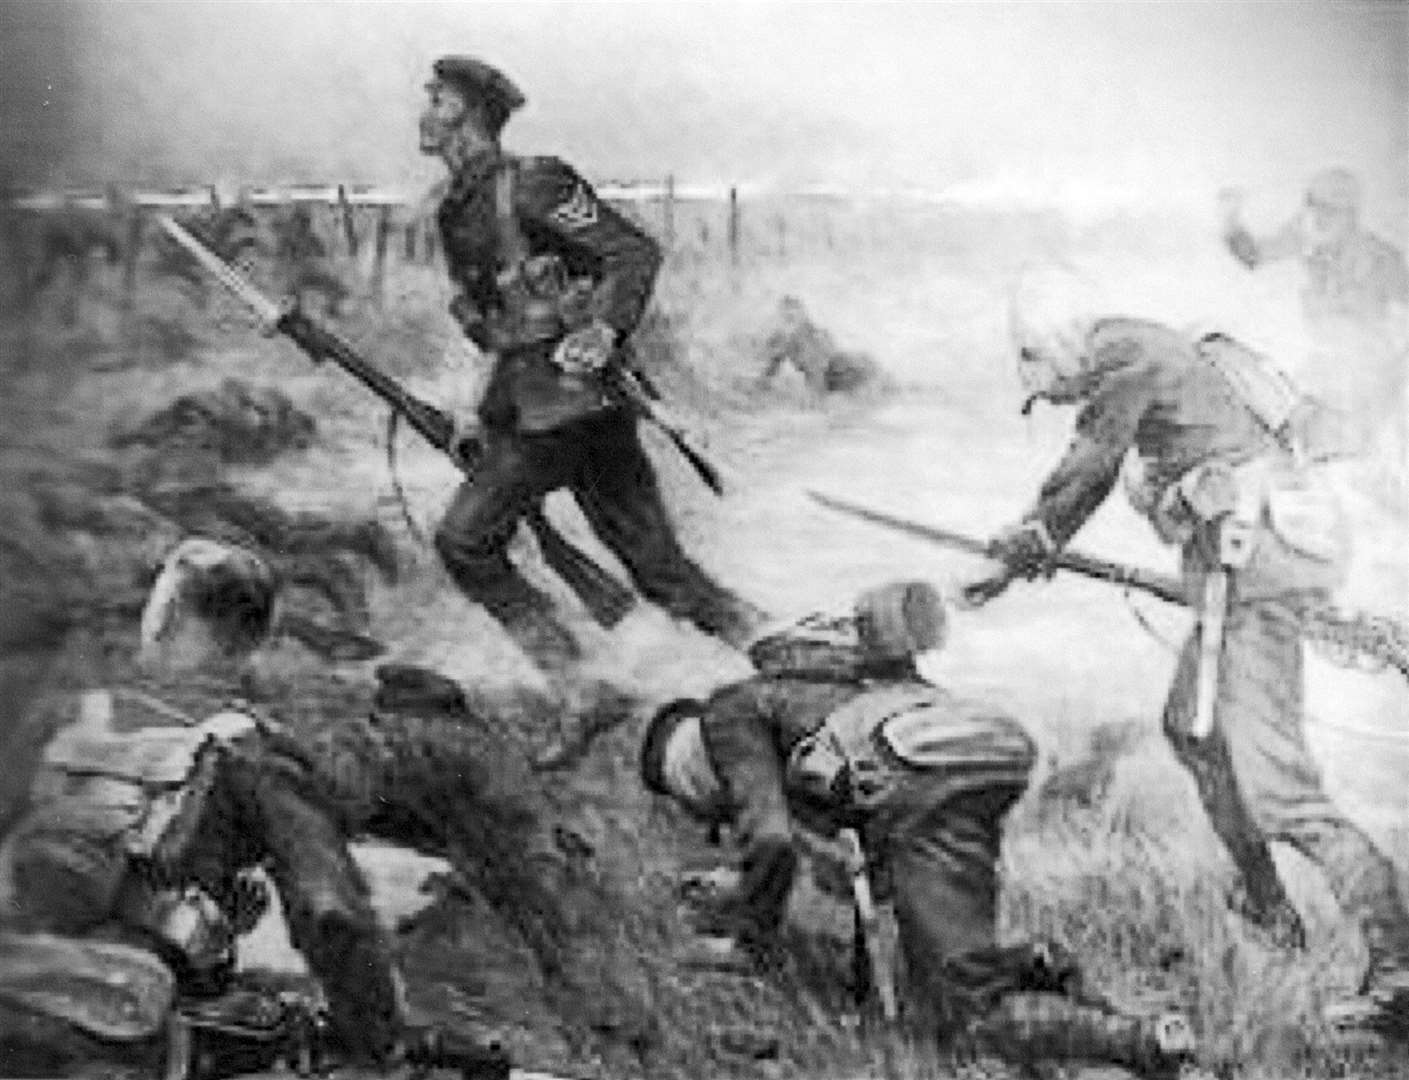 Sgt Harry Wells, a former farm boy from Herne, won the Victoria Cross despite losing two fingers in an accident. He is seen here in battle. Picture: Emma Howe